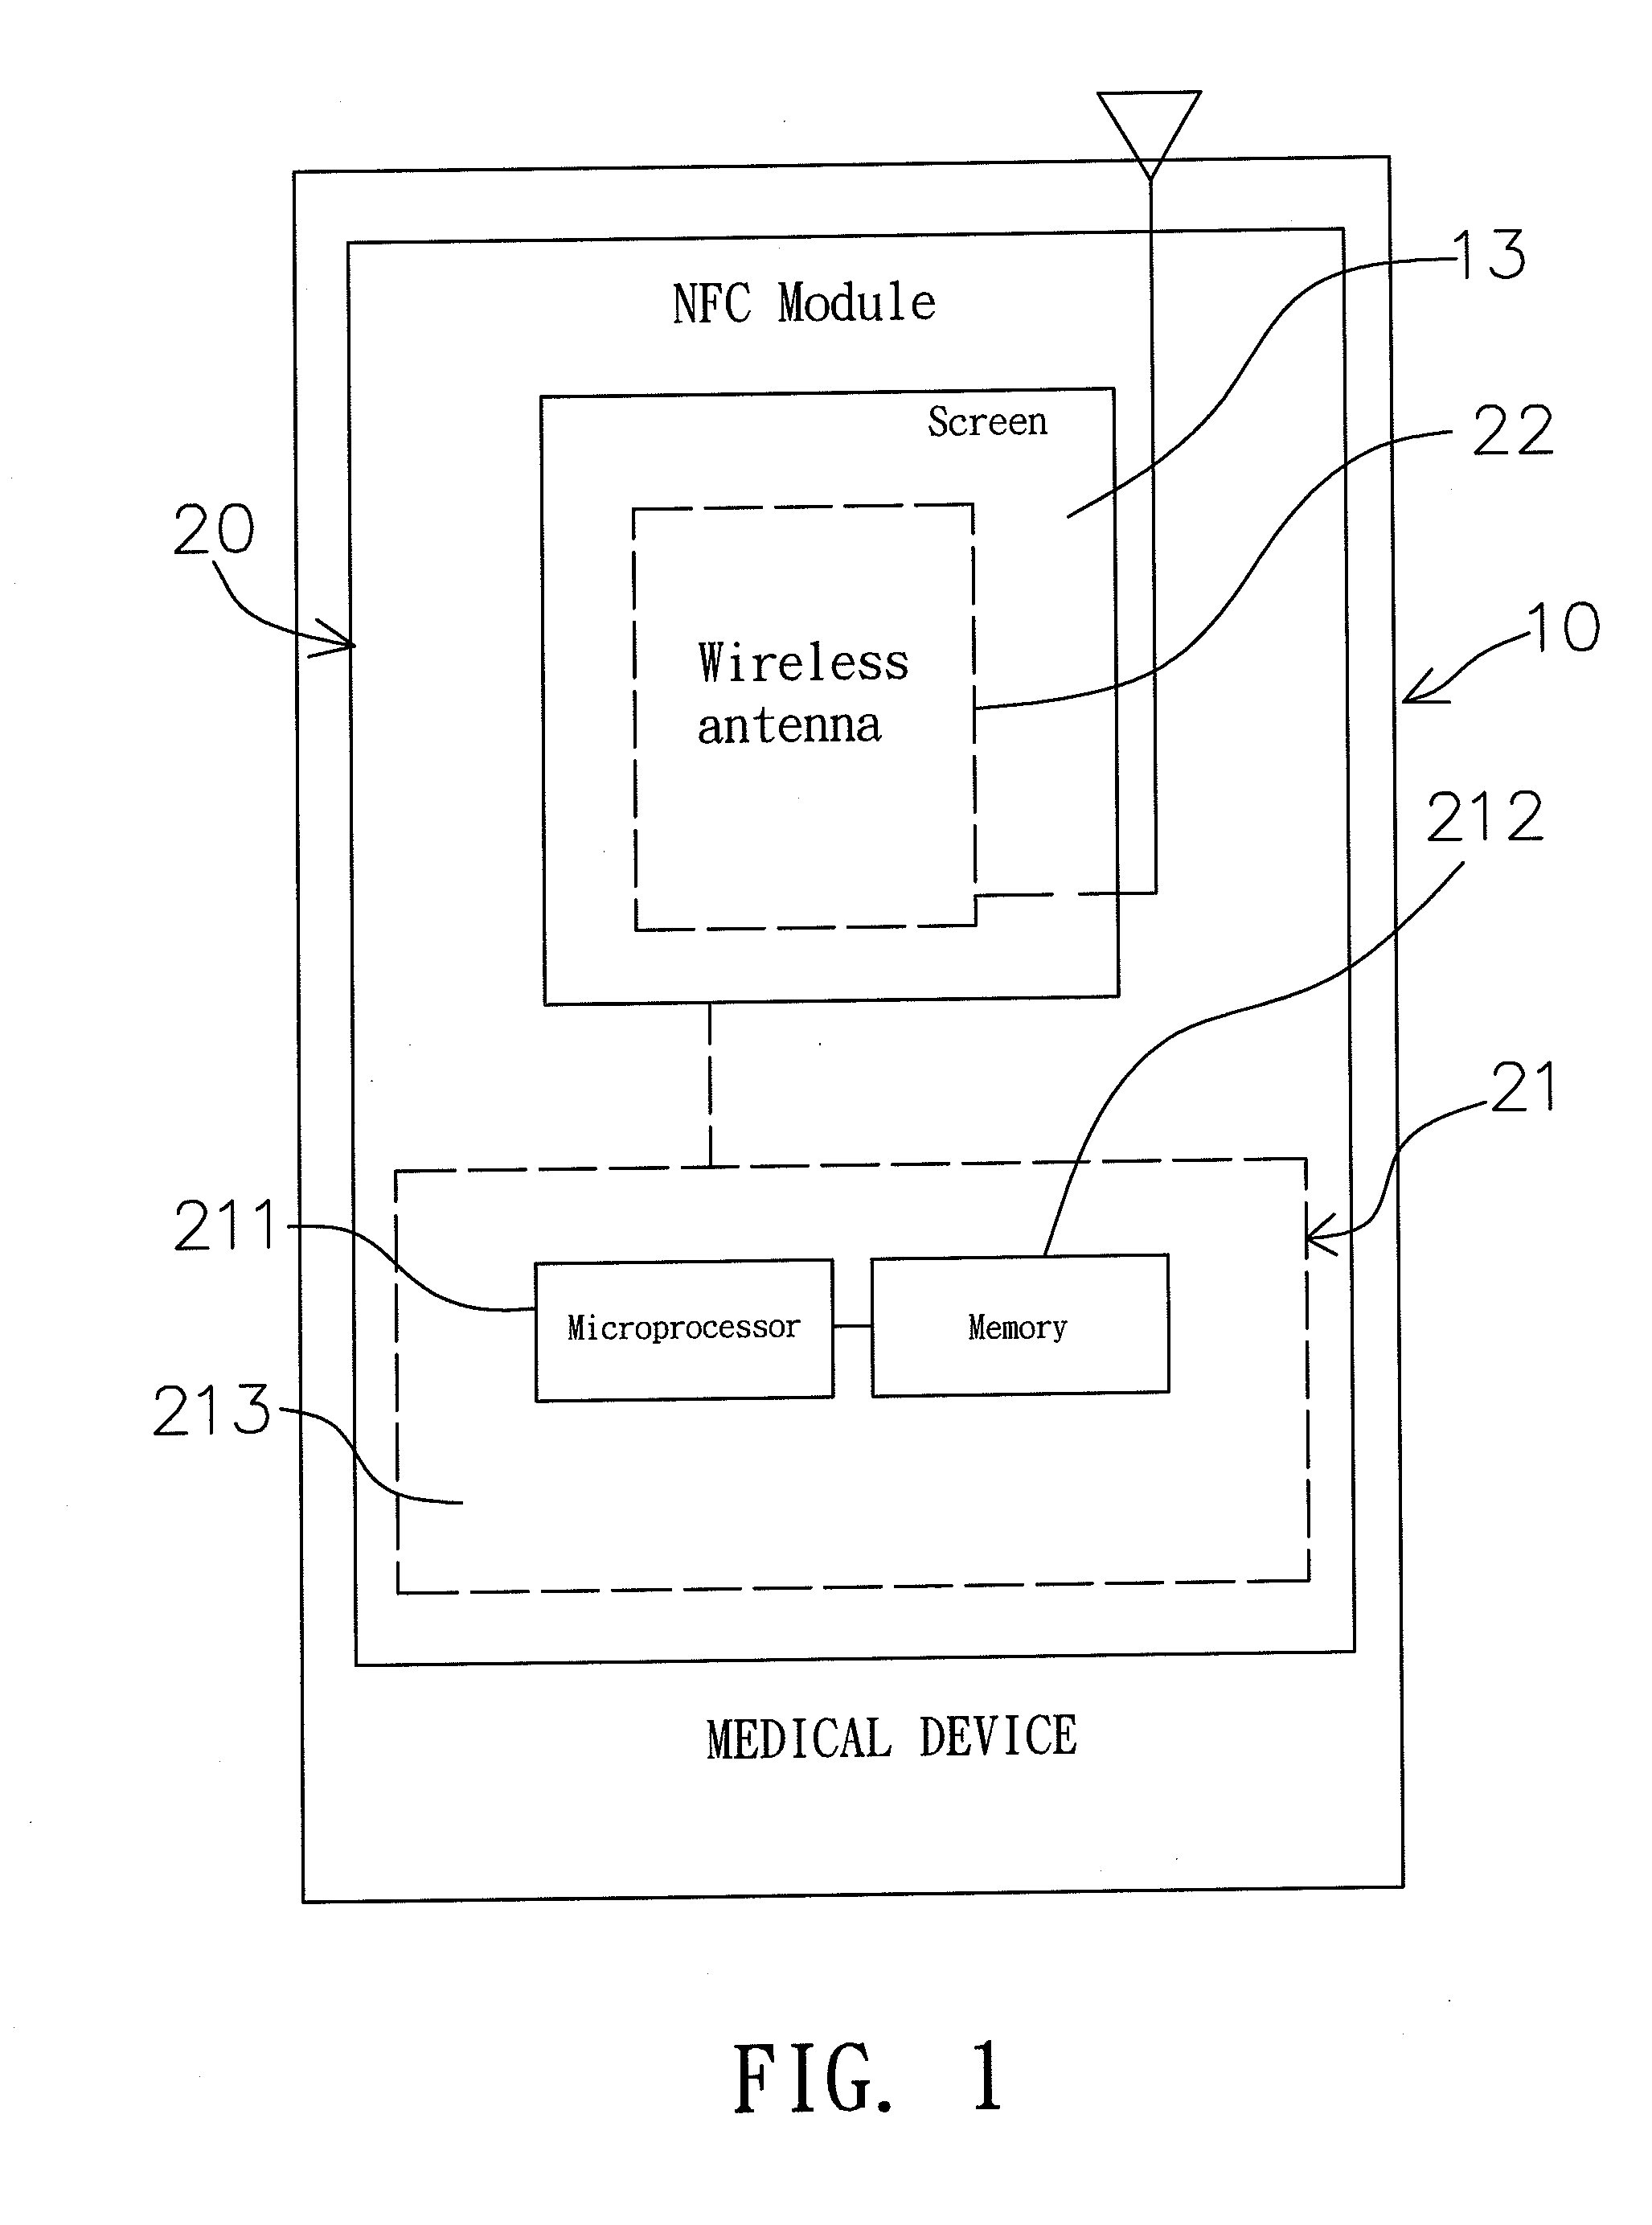 Antenna configuration structure of an NFC (near field communication) enabled medical device